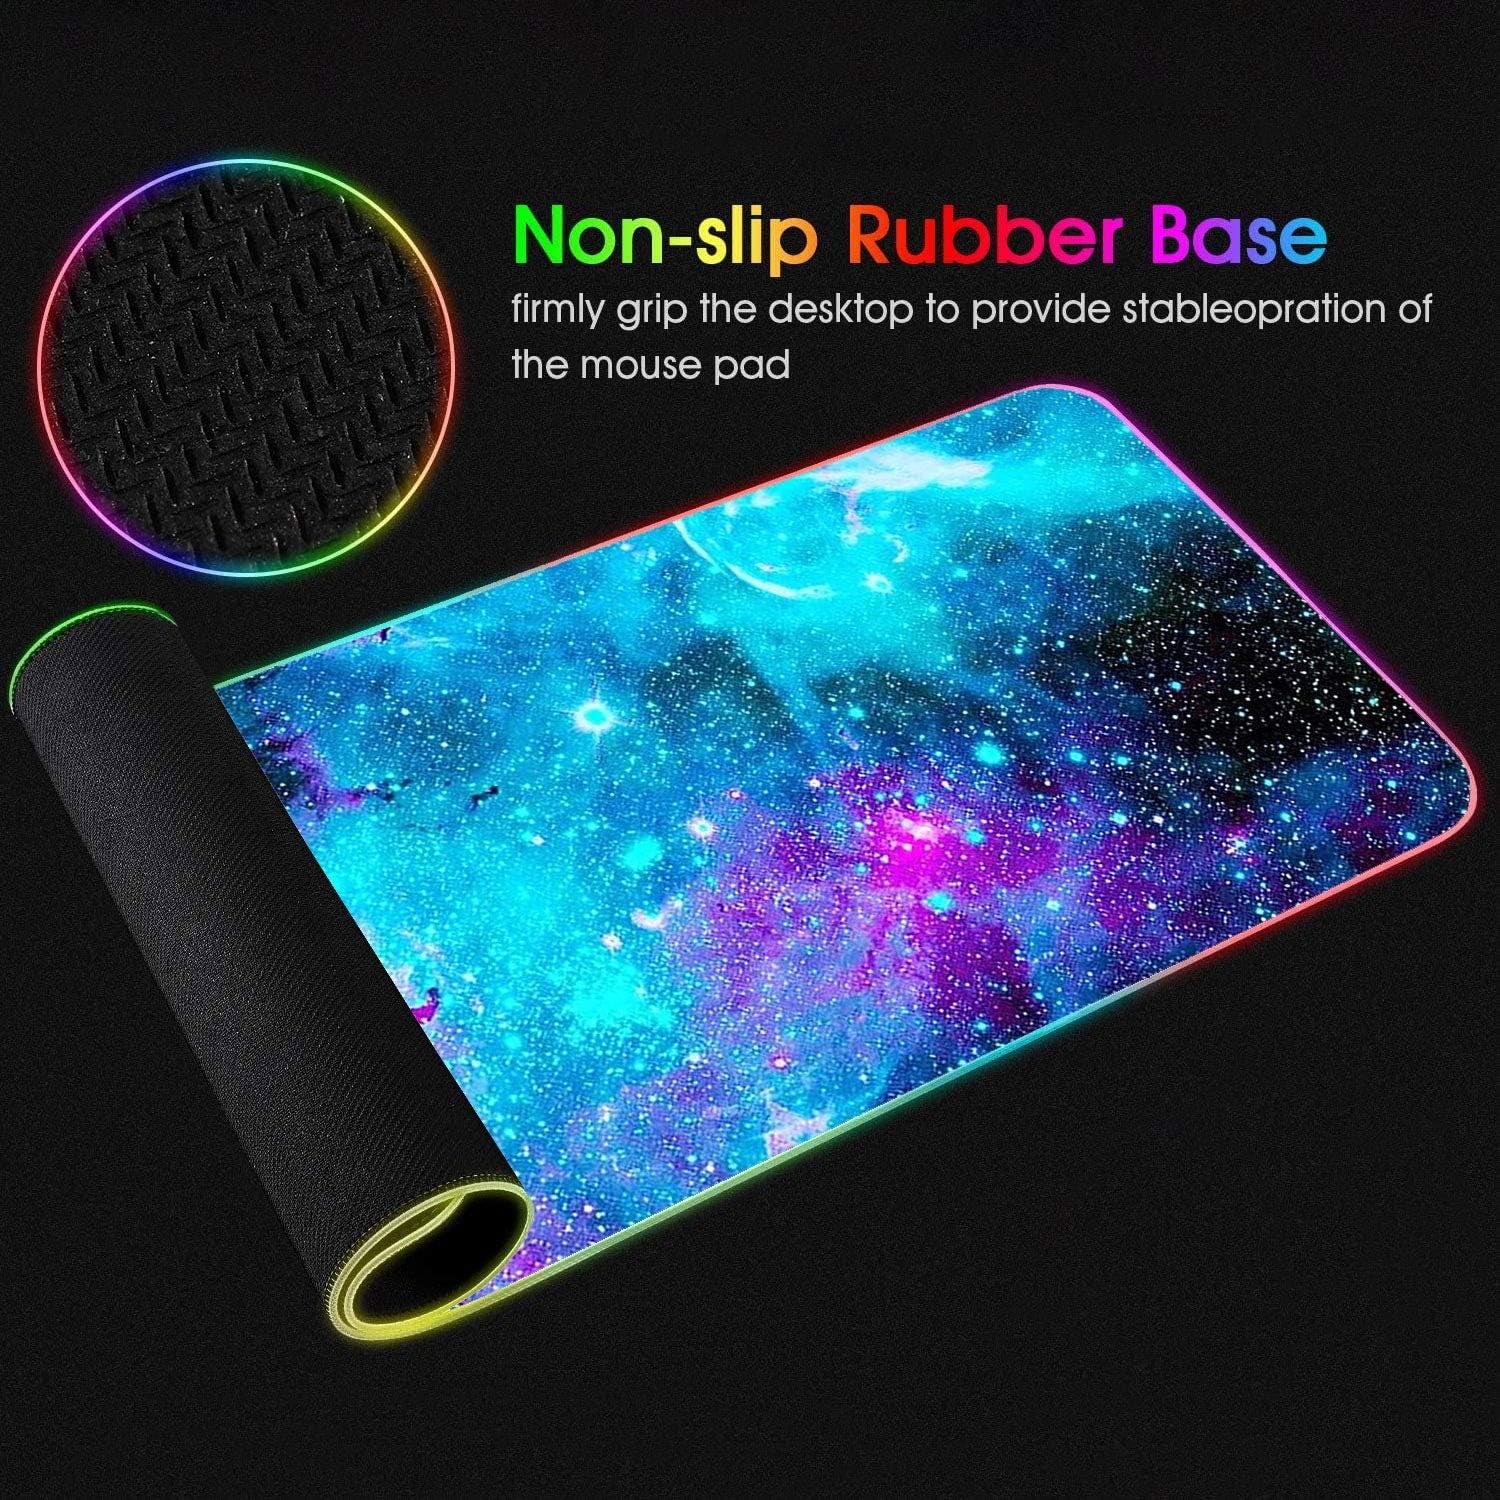 RGB Gaming Mouse Pad with Coffee Coaster, XXL Large Glowing LED Mousepad, Anti-Slip Rubber Base, Computer Keyboard Desk Mouse Mat 31.5 X 11.8 Inch - Blue Galaxy Nebula Universe Space